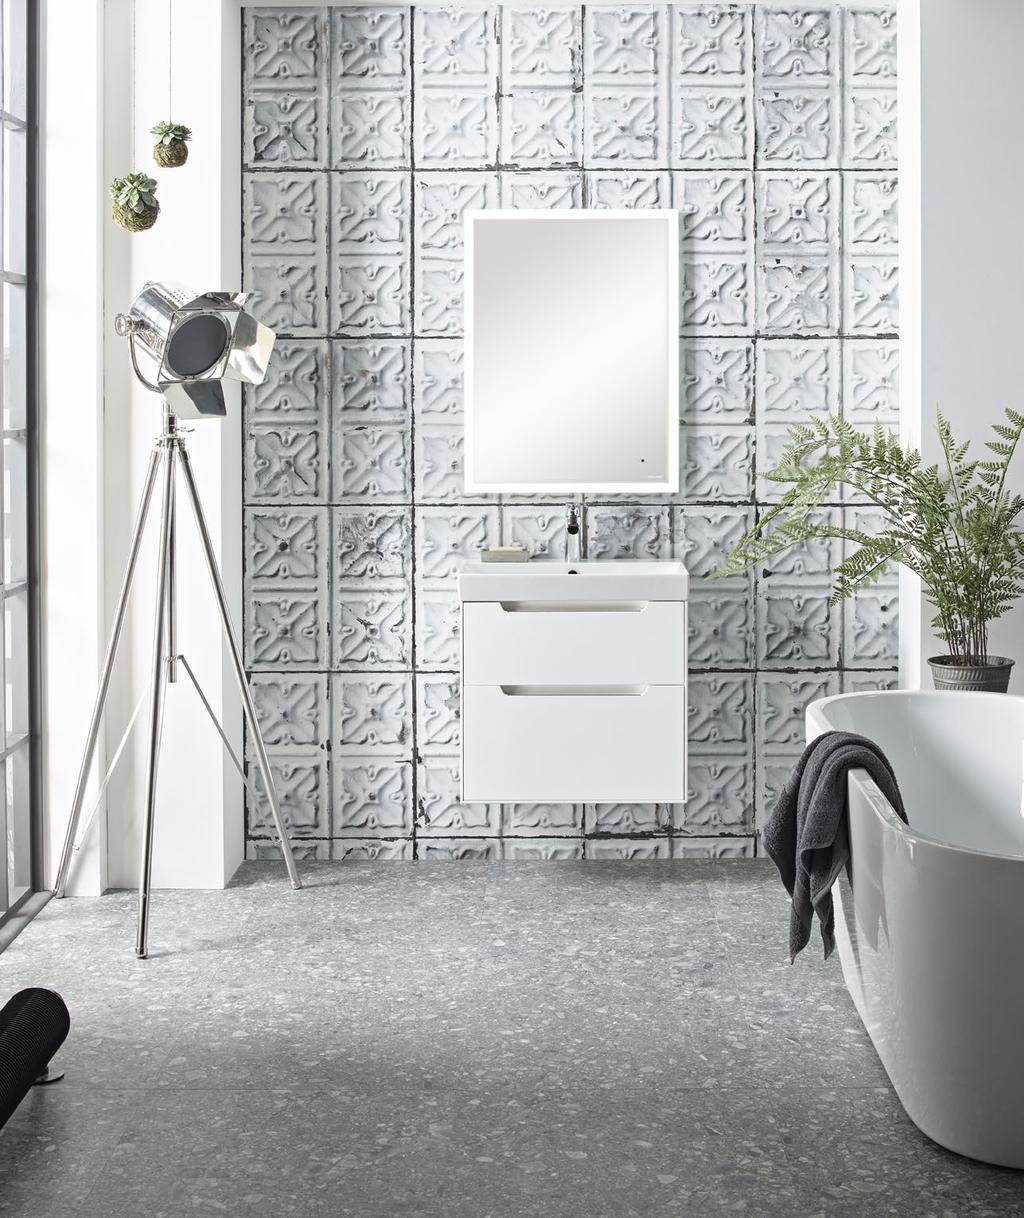 MONOGRAPH Quality and Craftsmanship With sleek lines and design cues taken from mid century styles, Monograph will bring a cool and contemporary look to the bathroom.